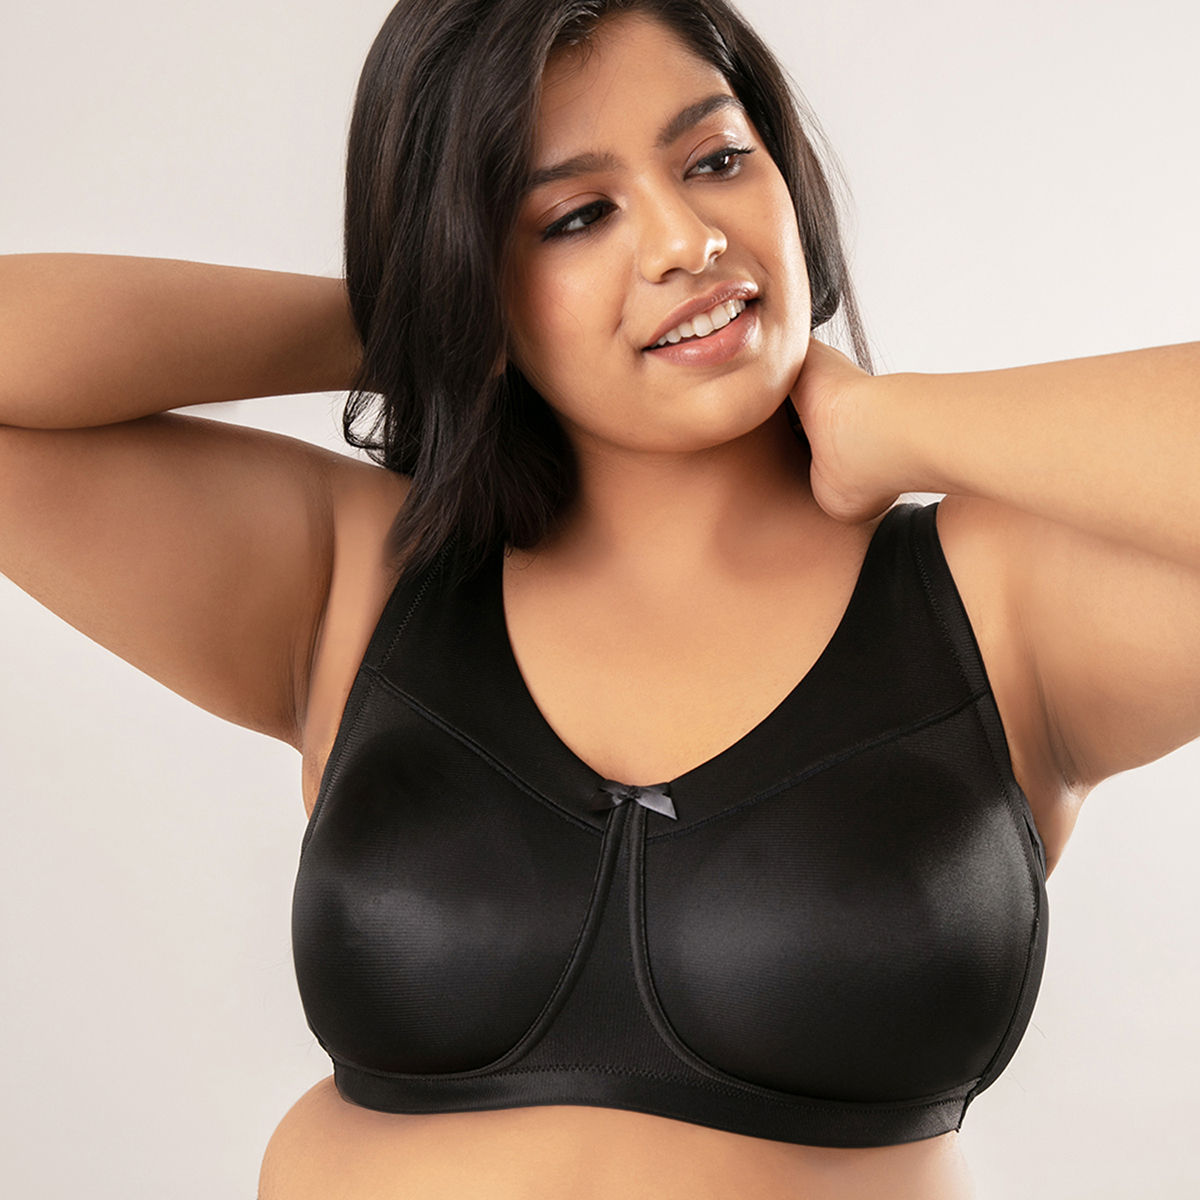 Nykd By Nykaa - Finding your perfect bra fit, size and style is just a  click away. Why should you try the Nykd bra advisor? Studies show that only  20% of women